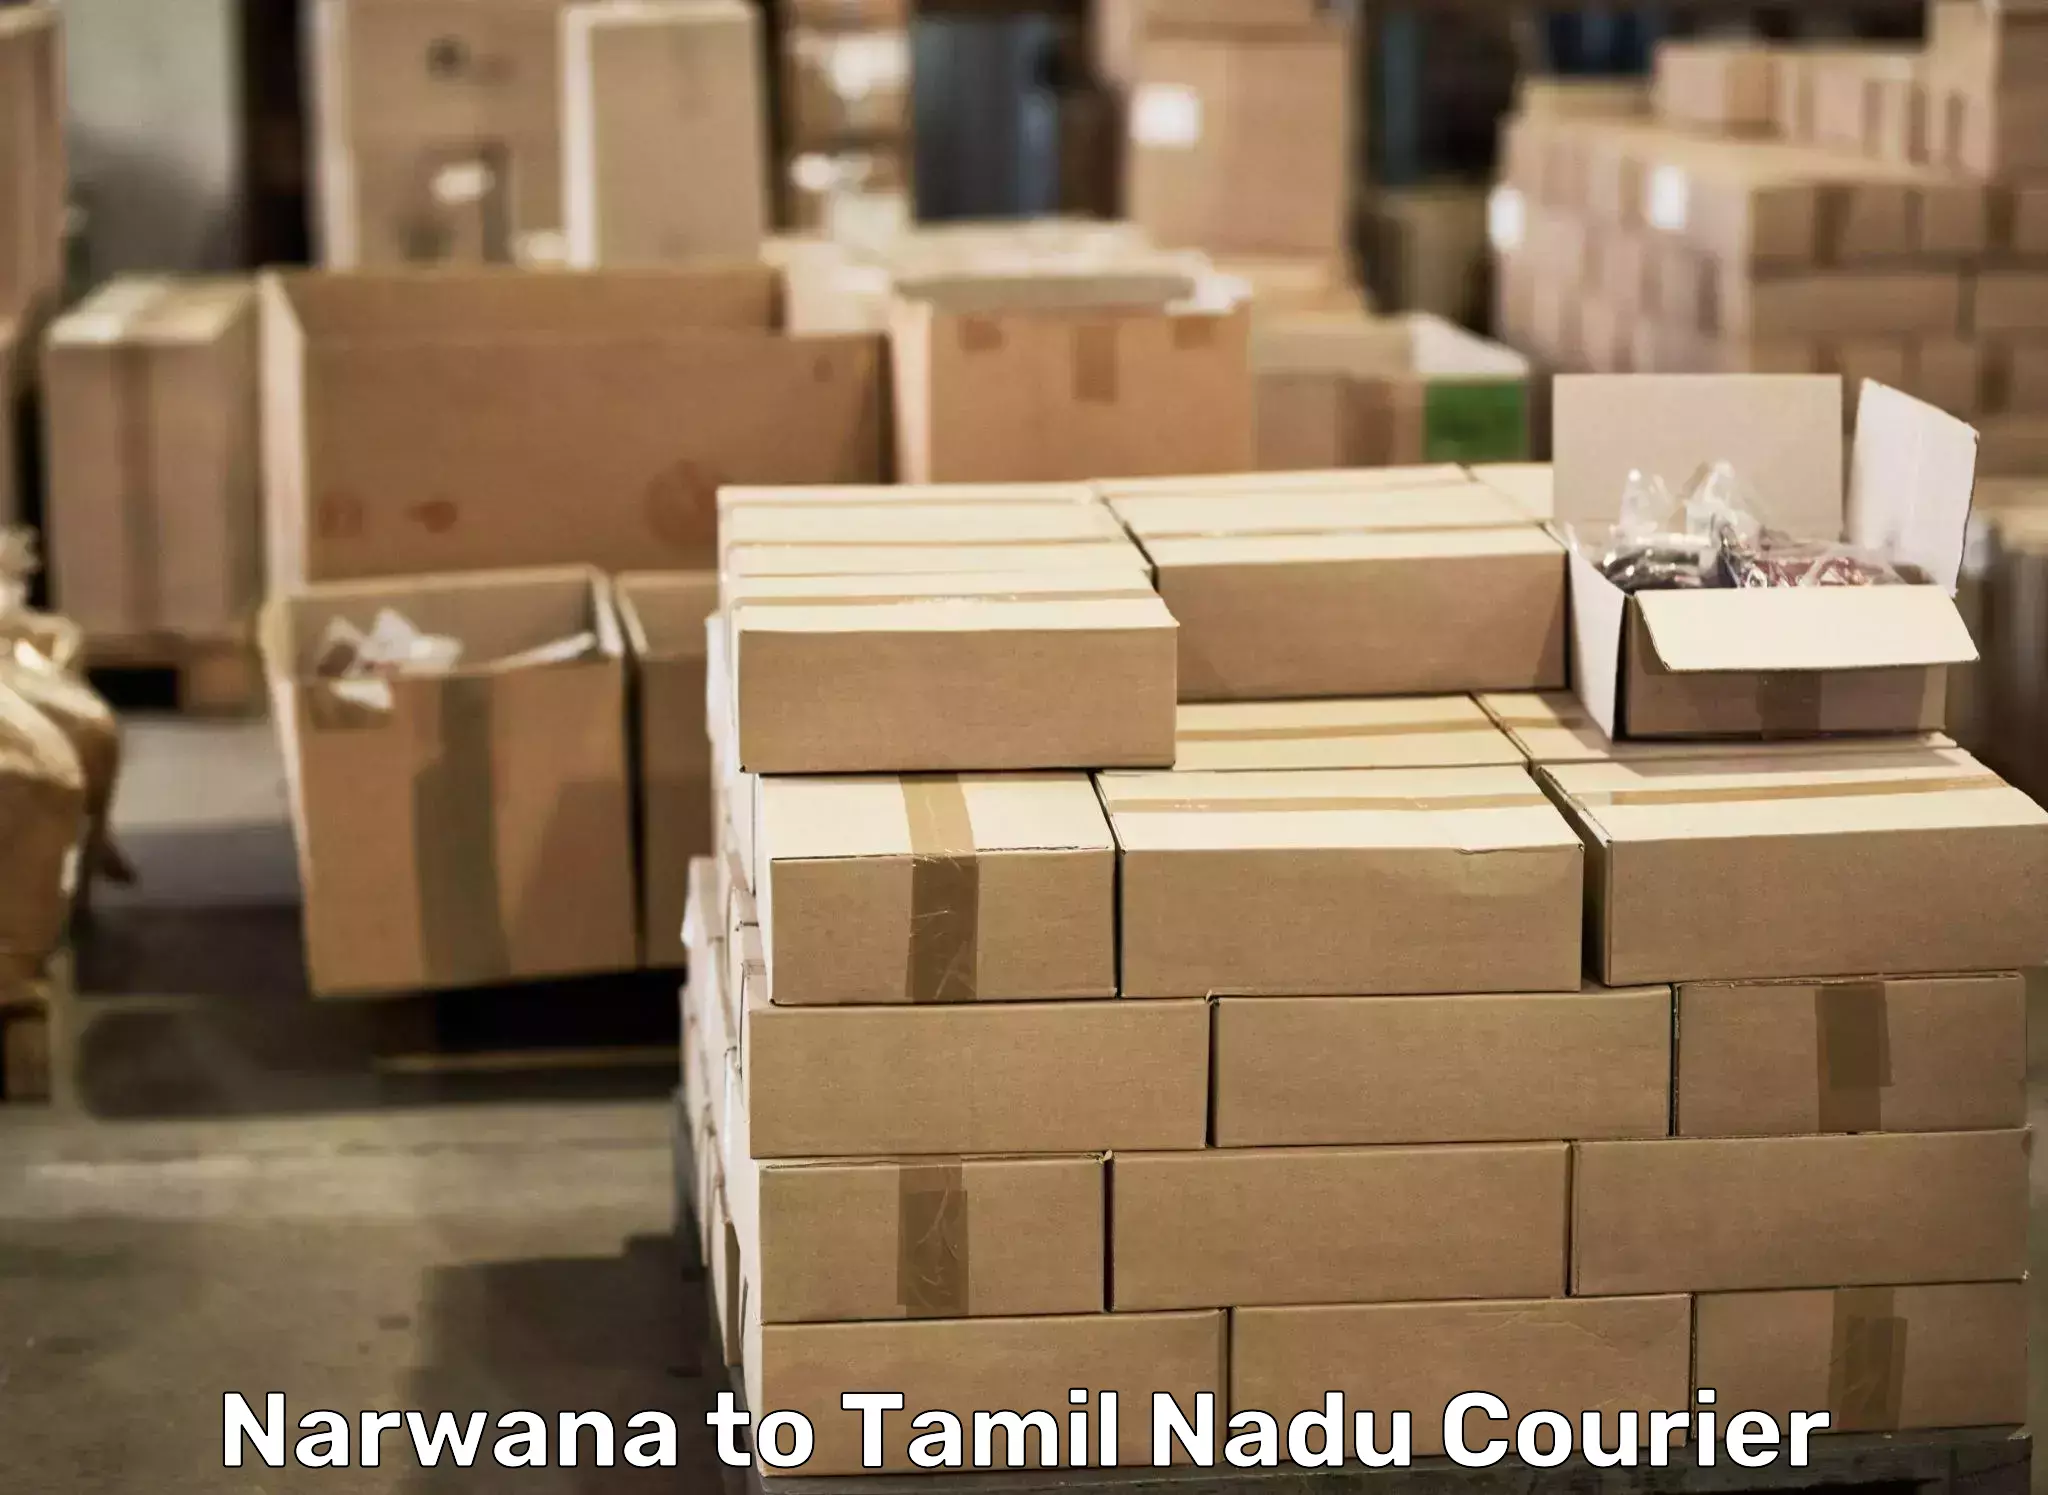 Professional movers Narwana to Meenakshi Academy of Higher Education and Research Chennai